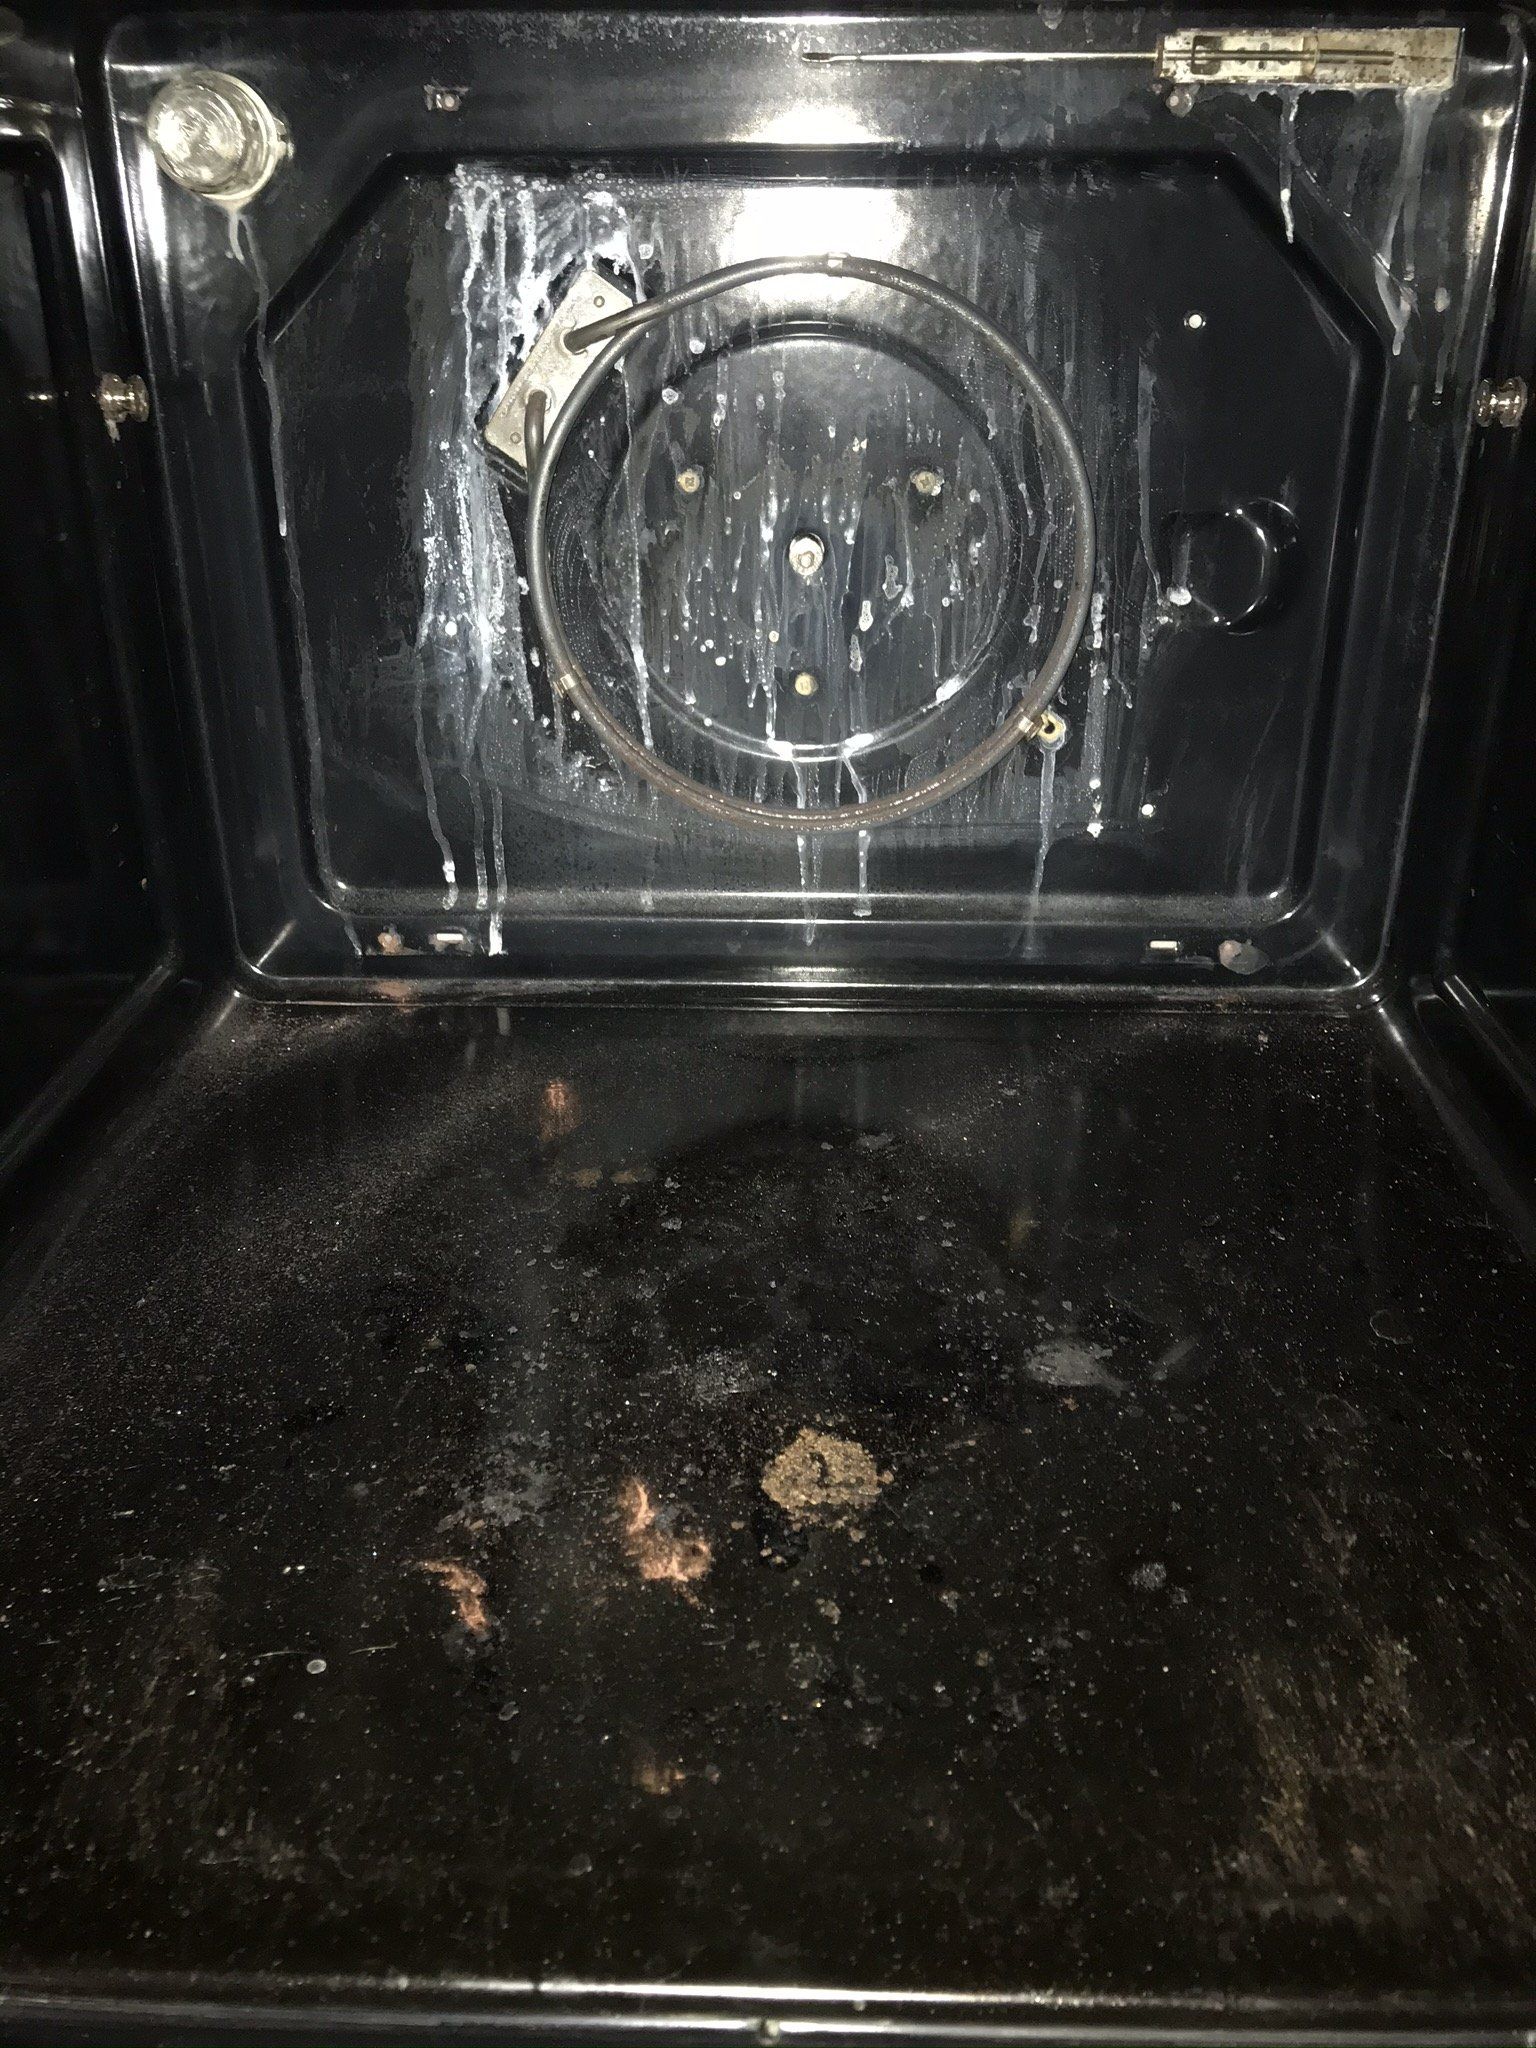 DIY Oven Cleaning results